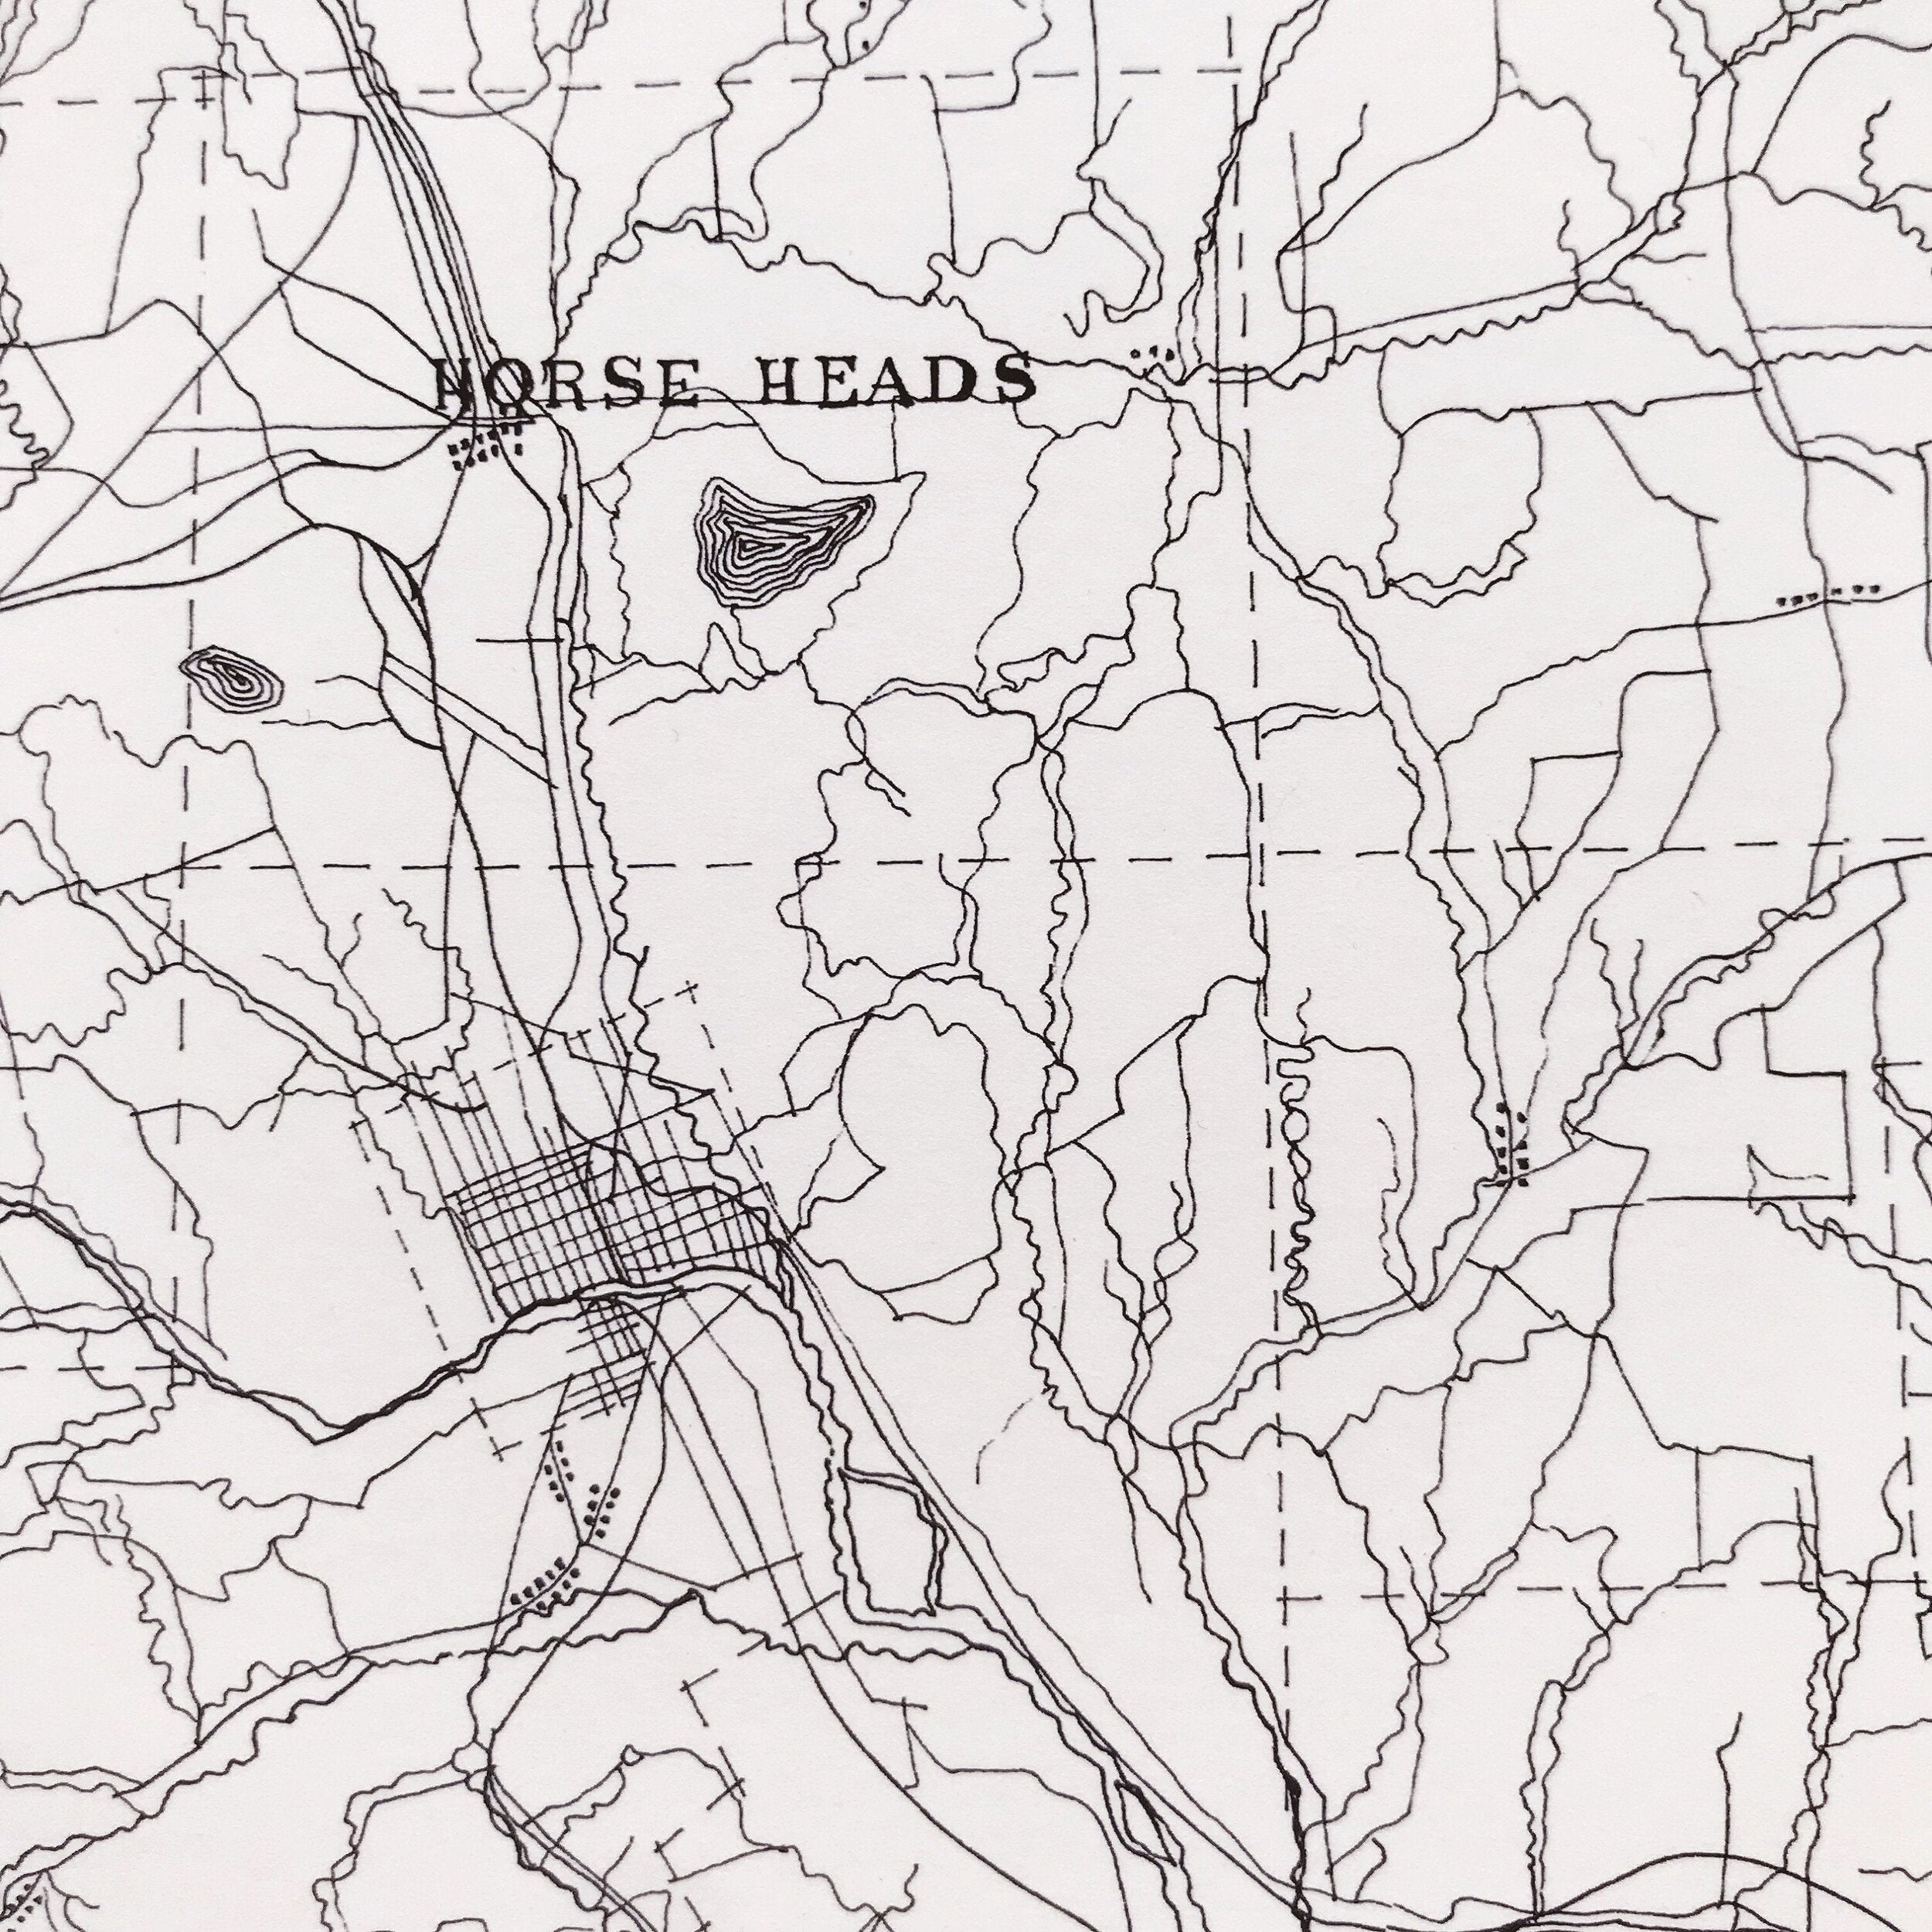 HORSEHEADS New York Map Drawing: PRINT